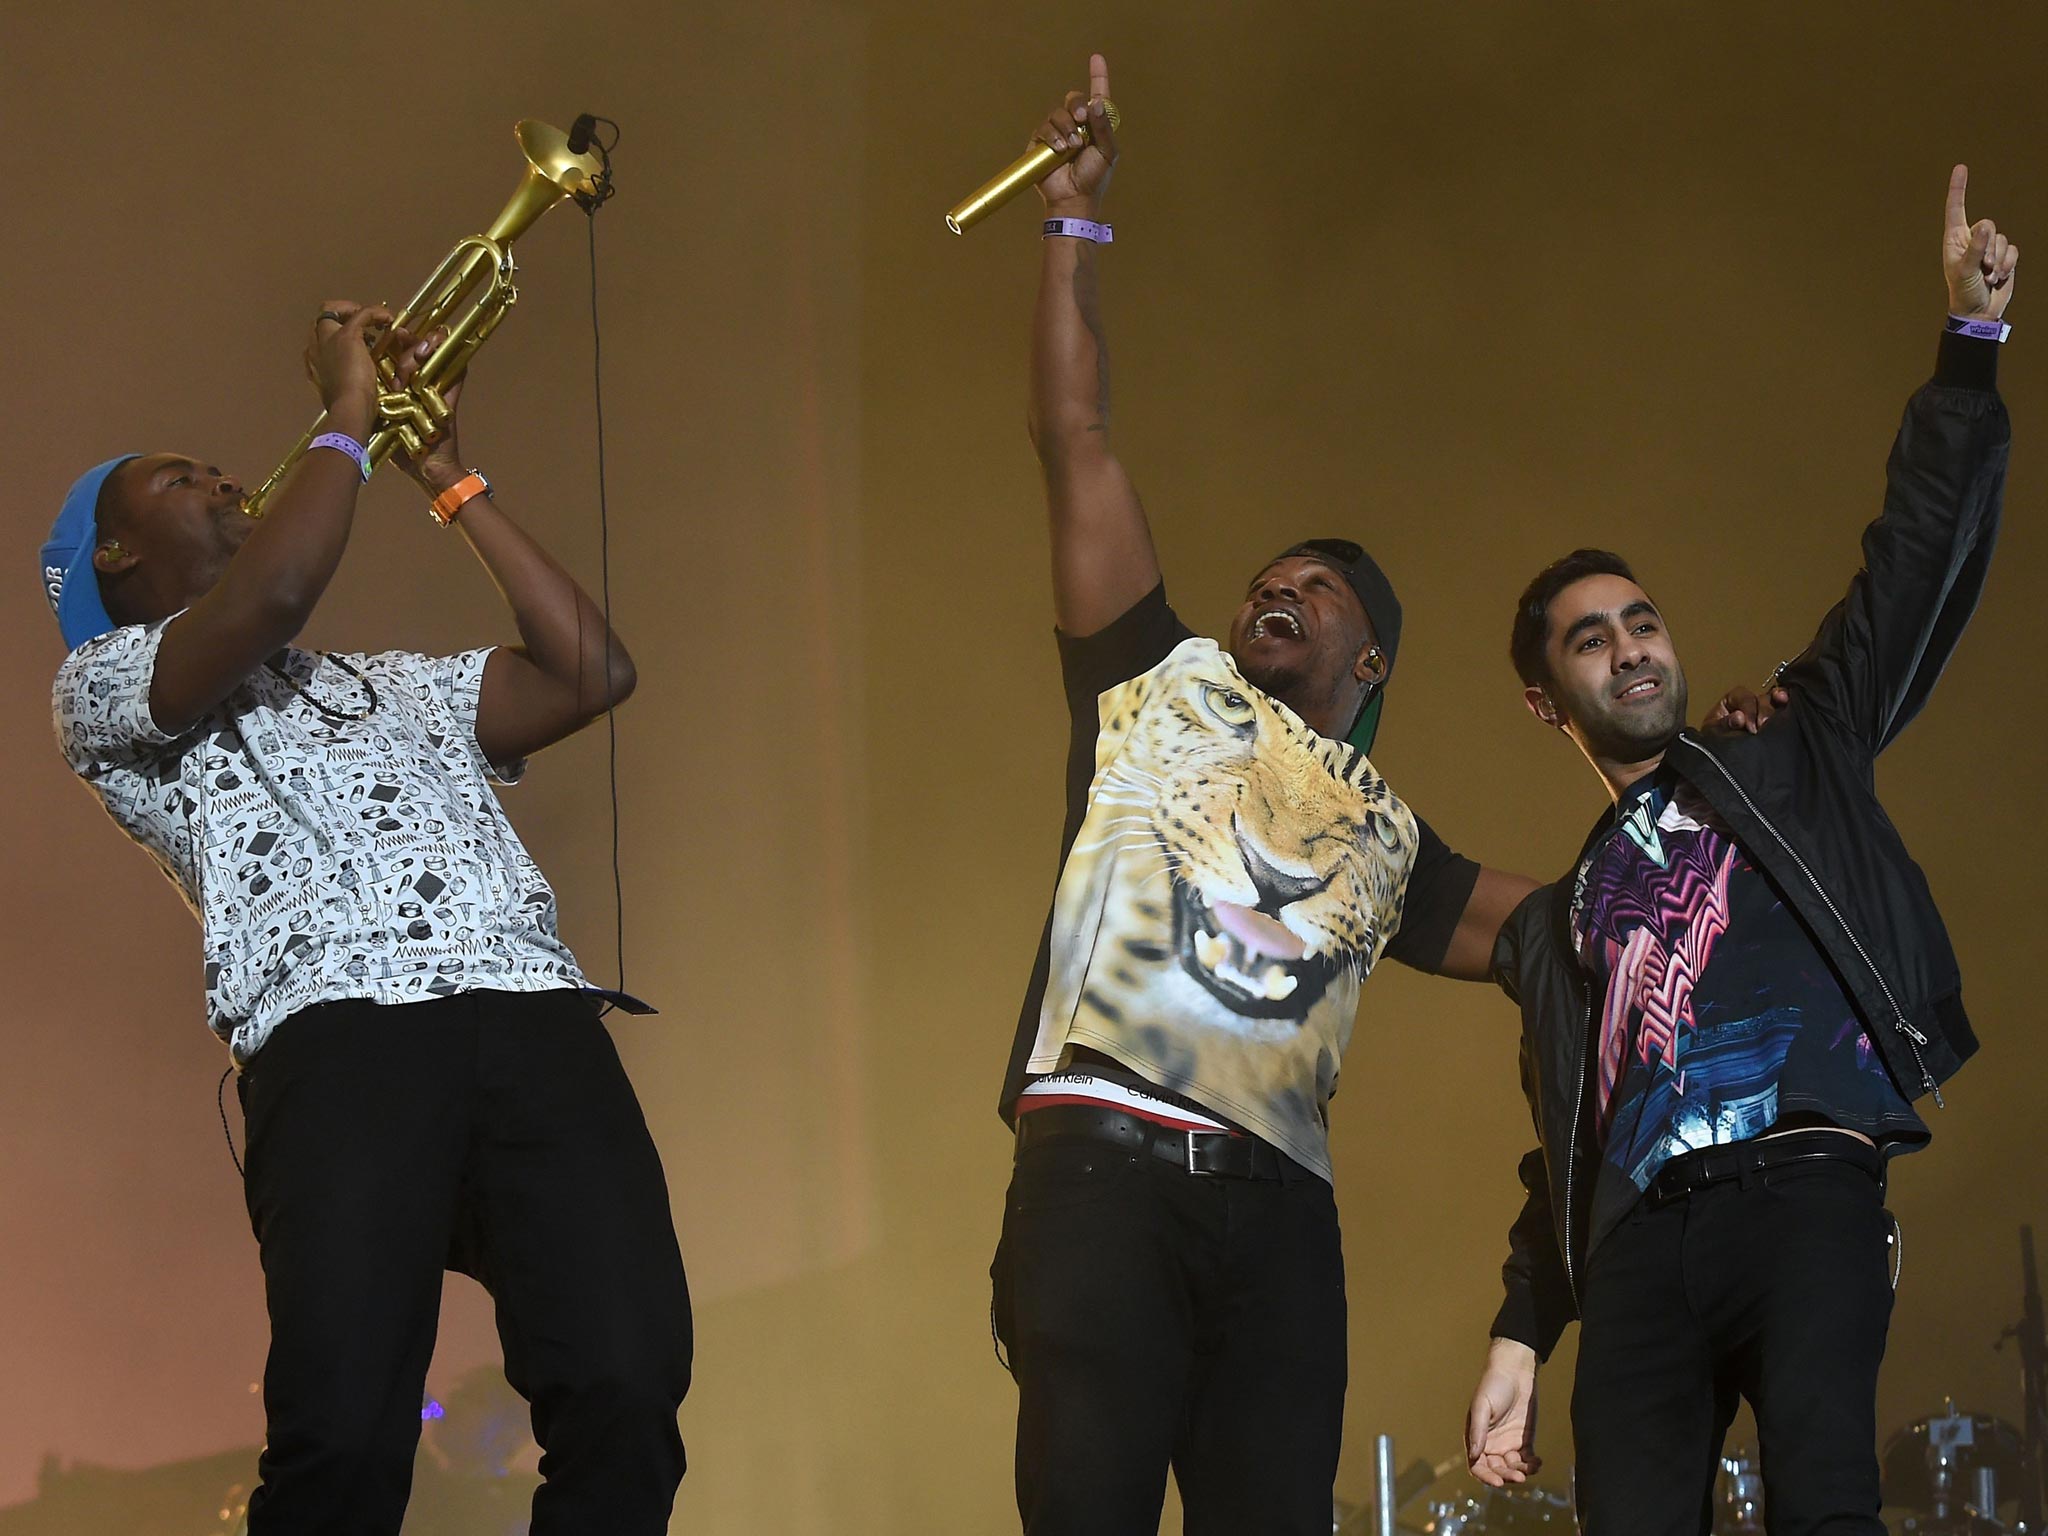 From left to right: Mark Crown, DJ Locksmith and Amir Amor of Rudimental performing on stage during day one of the Wireless Festival at Perry Park, Birmingham